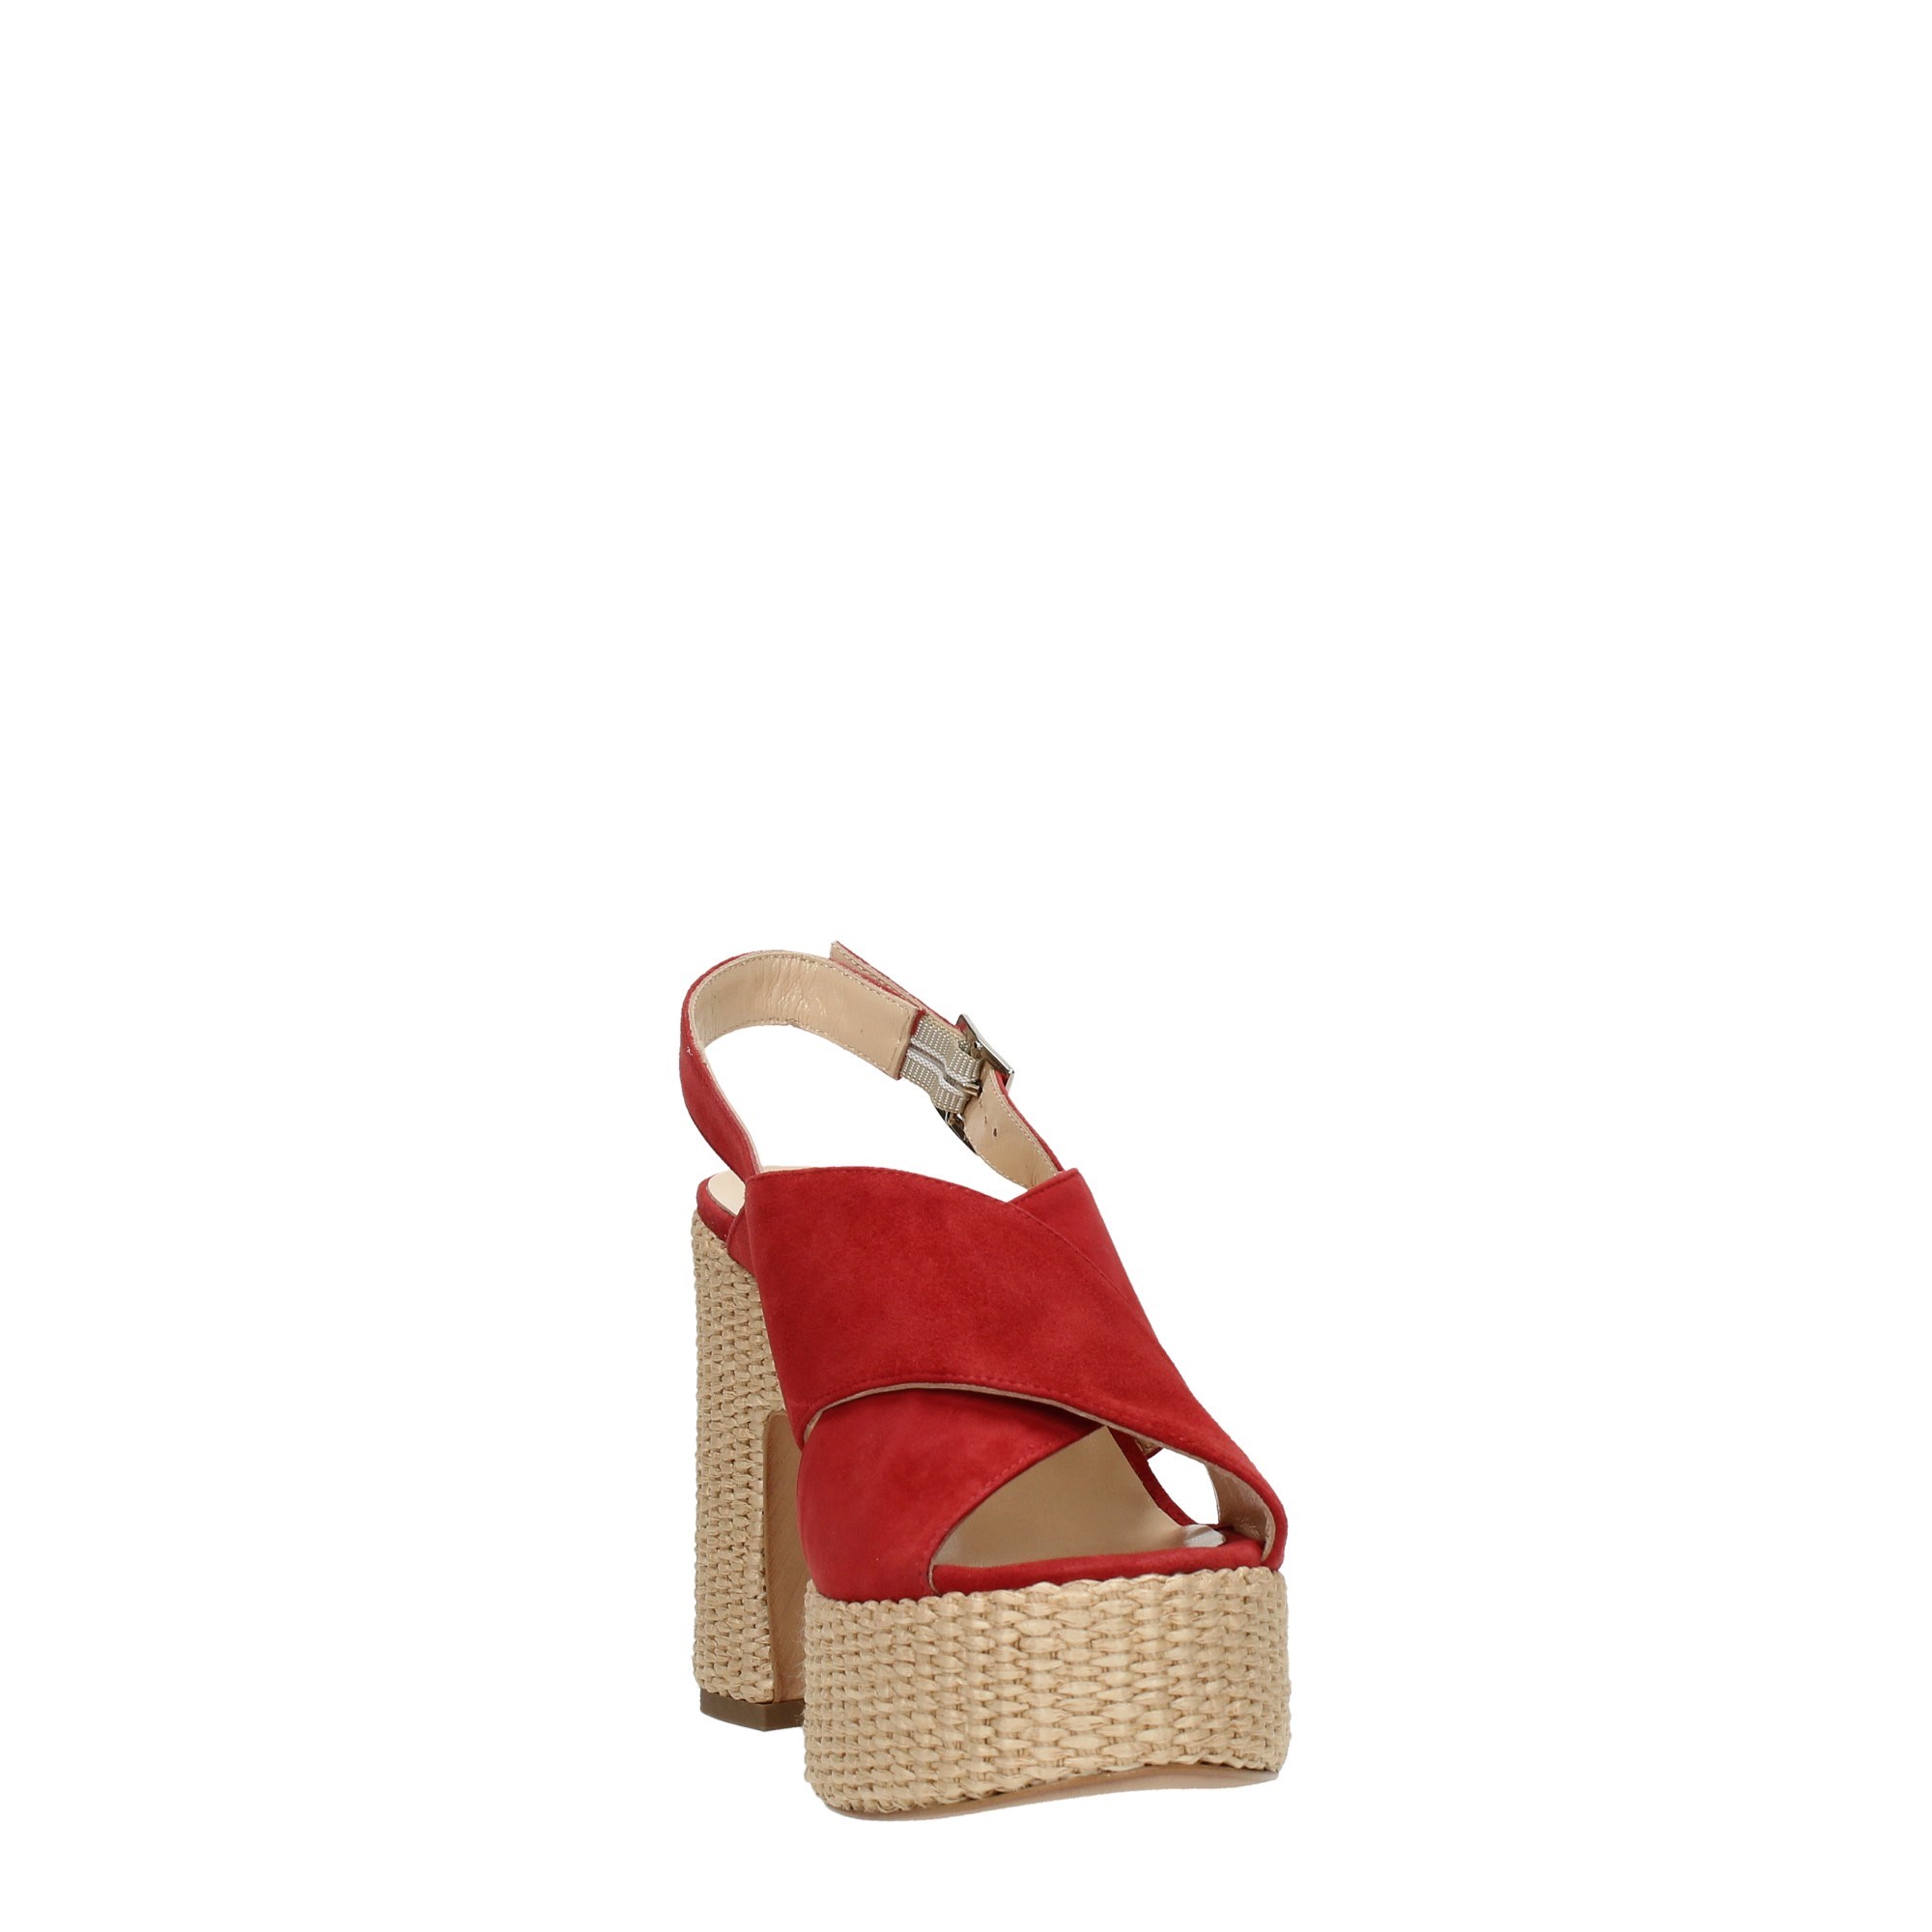 Shana Shoes Women Wedge Sandals Red R116